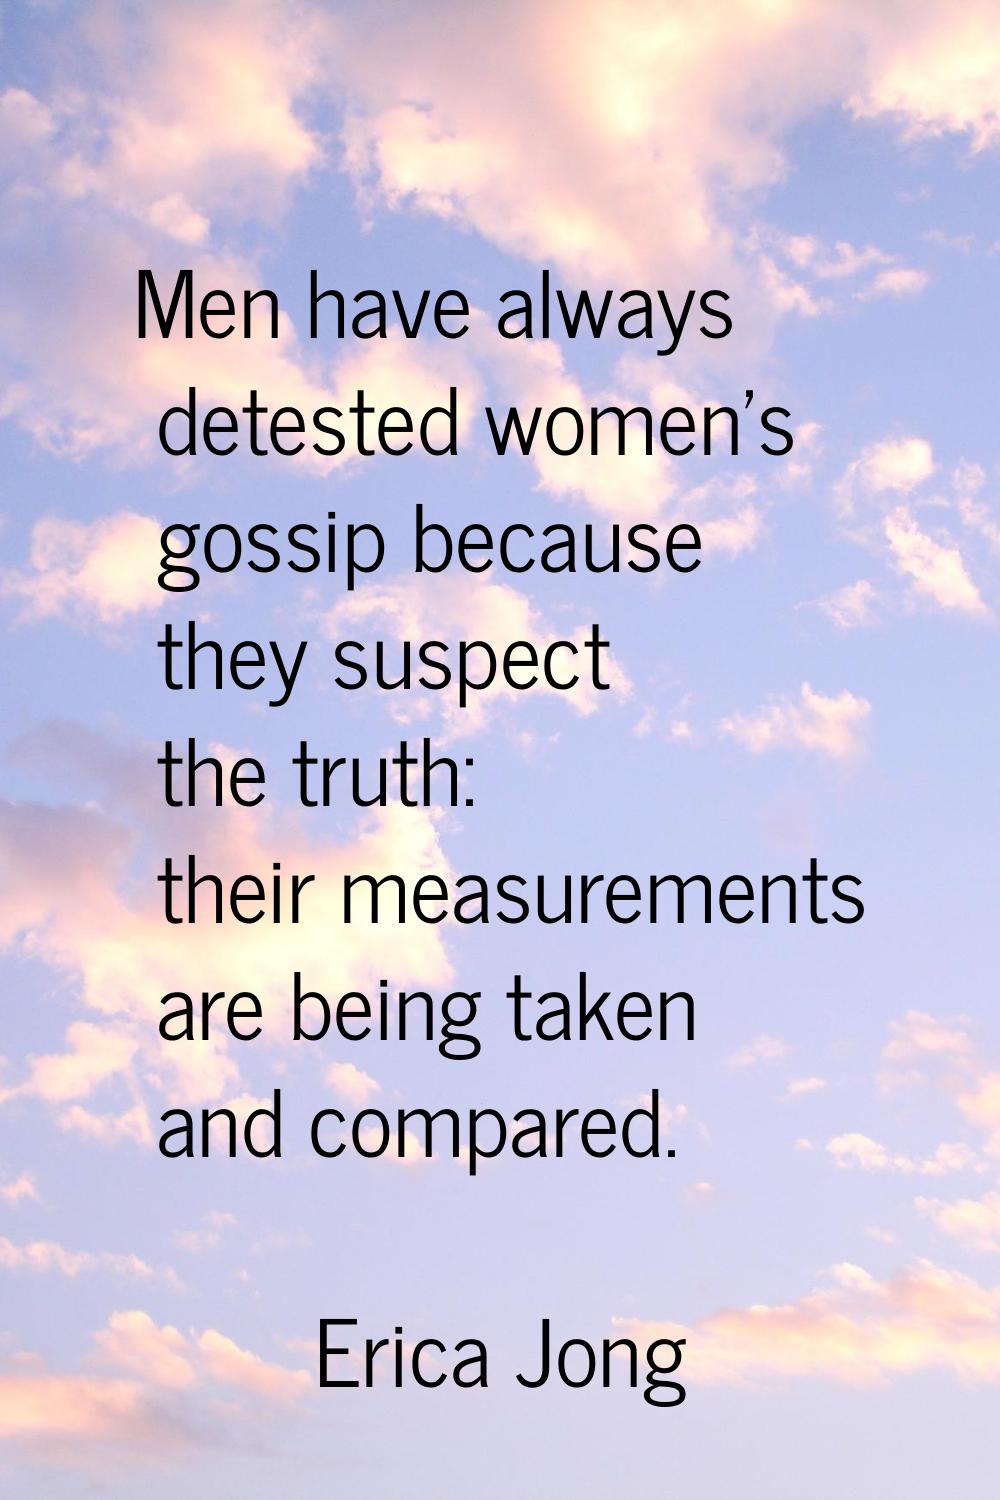 Men have always detested women's gossip because they suspect the truth: their measurements are bein